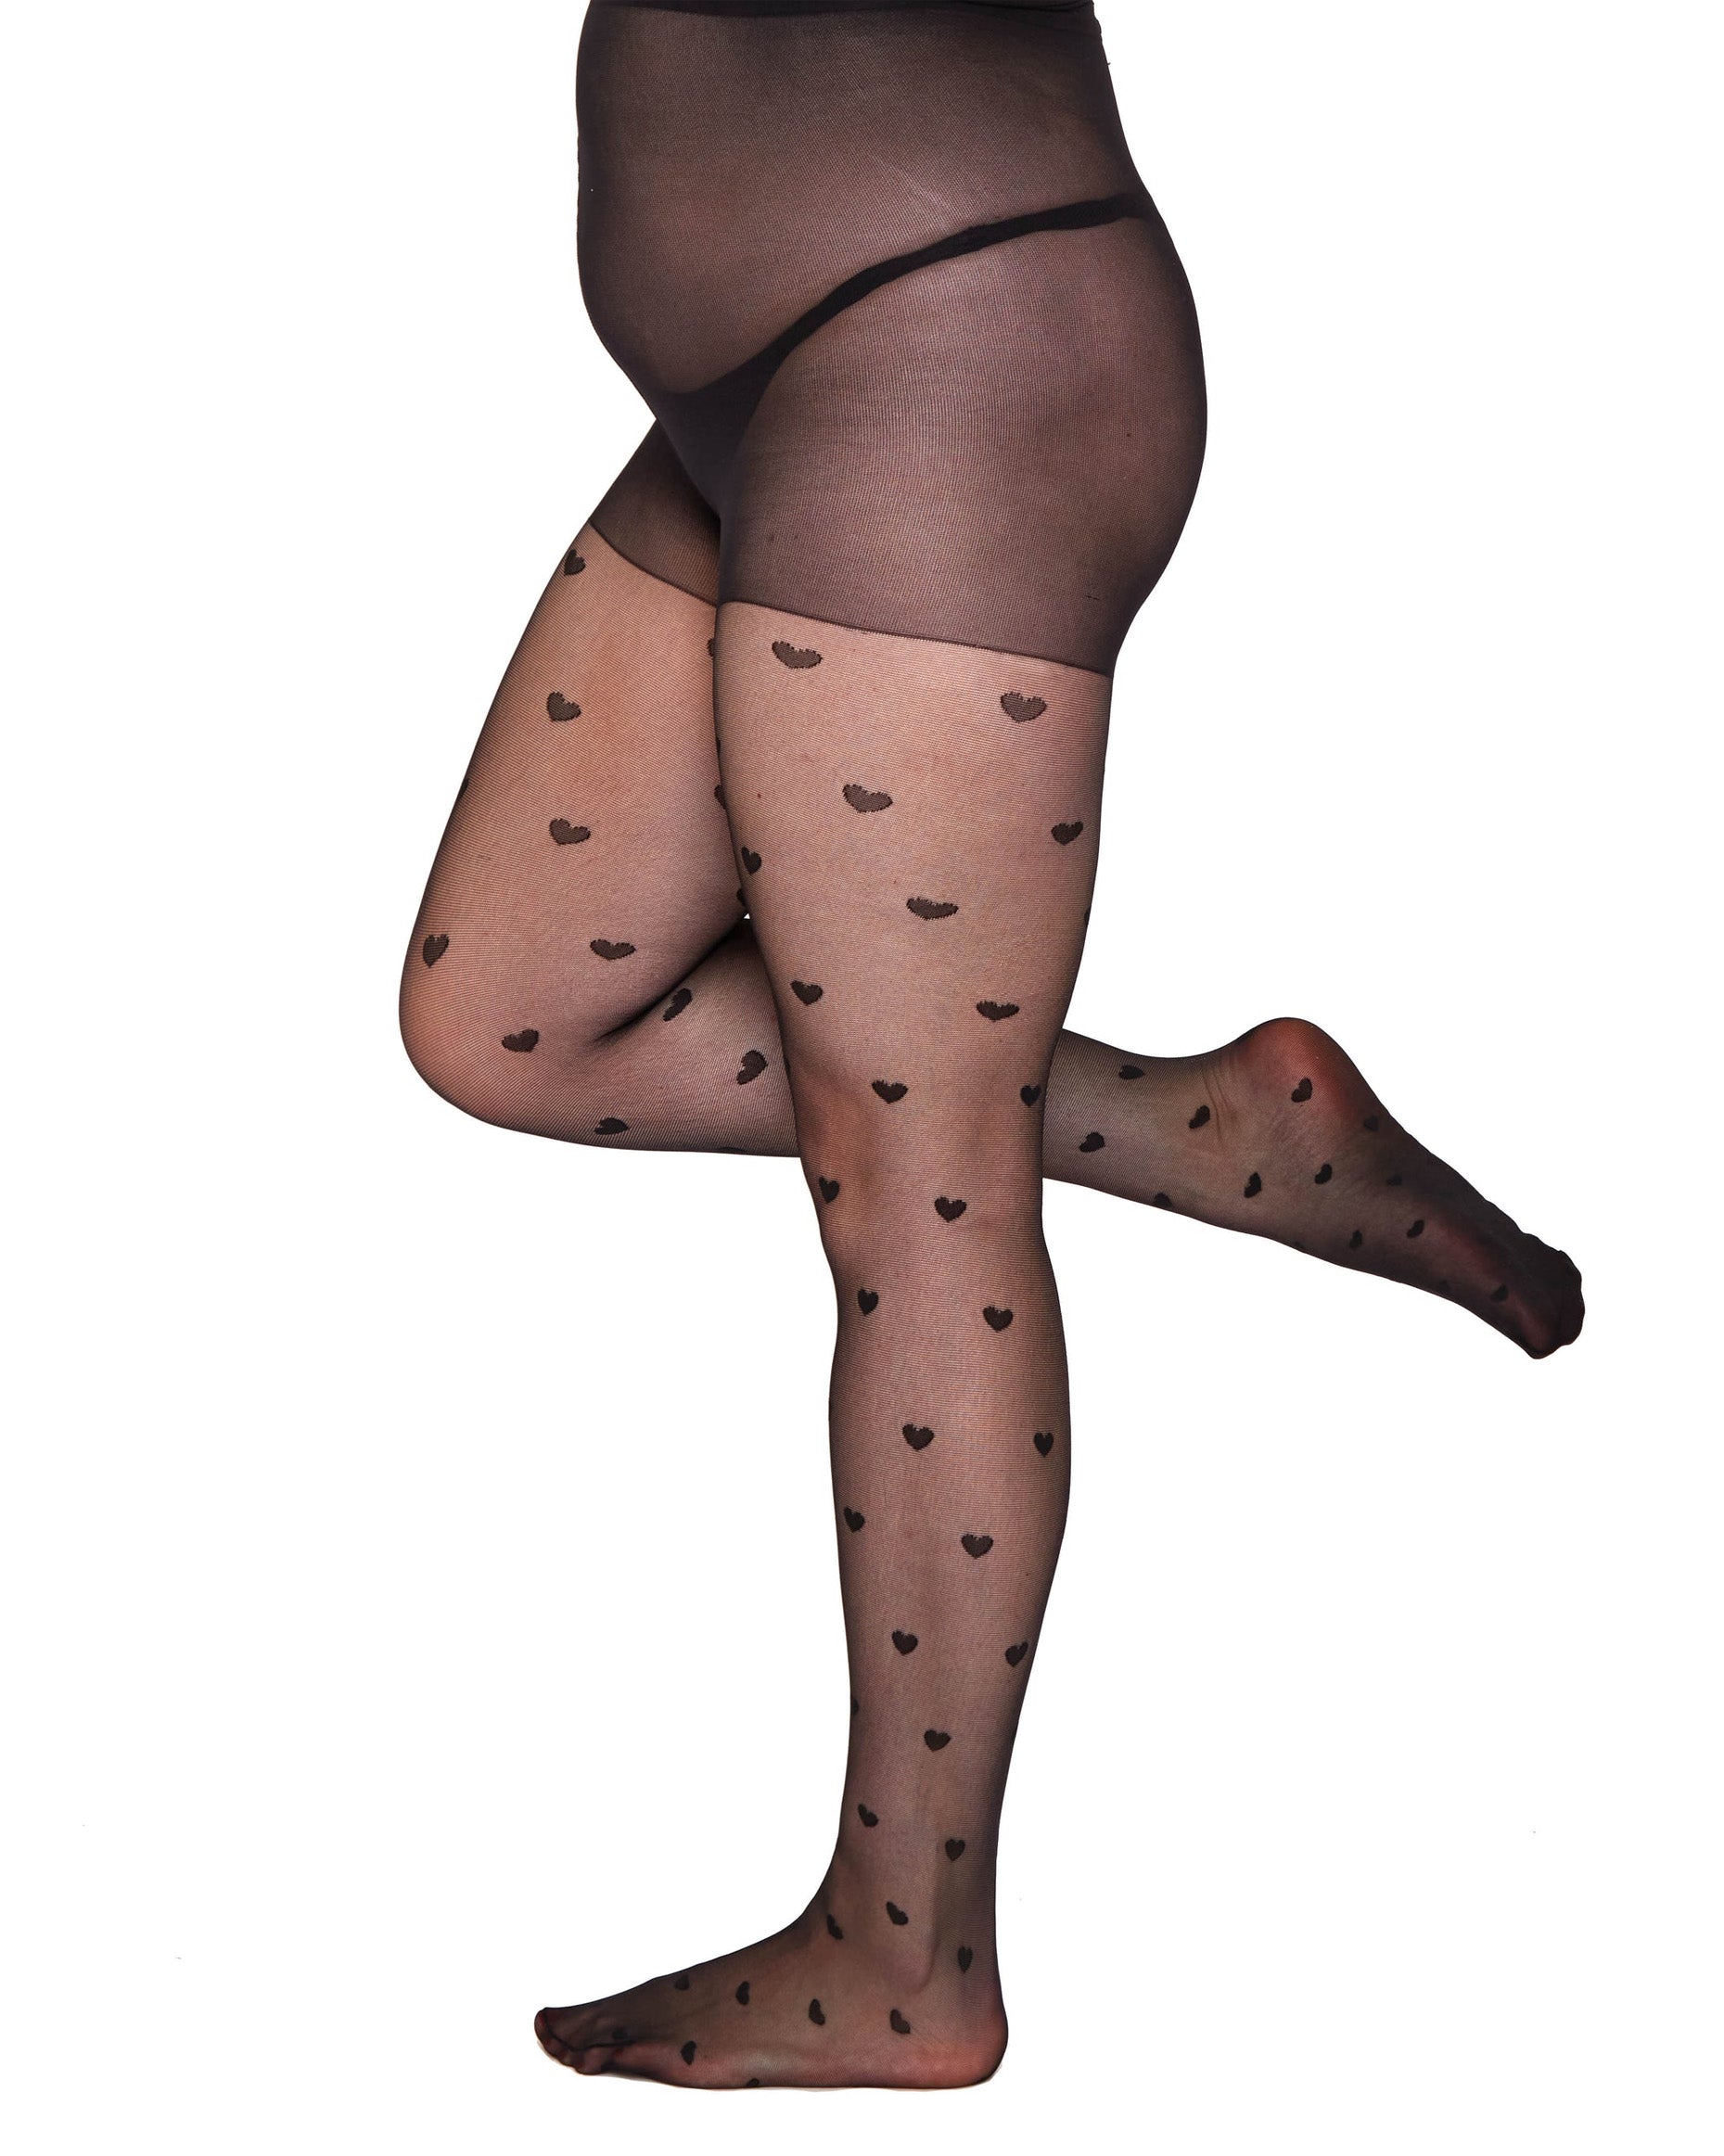 Pamela Mann Curvy Heart Tights - Sheer black plus size fashion tights with an all over woven heart pattern and opaque boxer top.